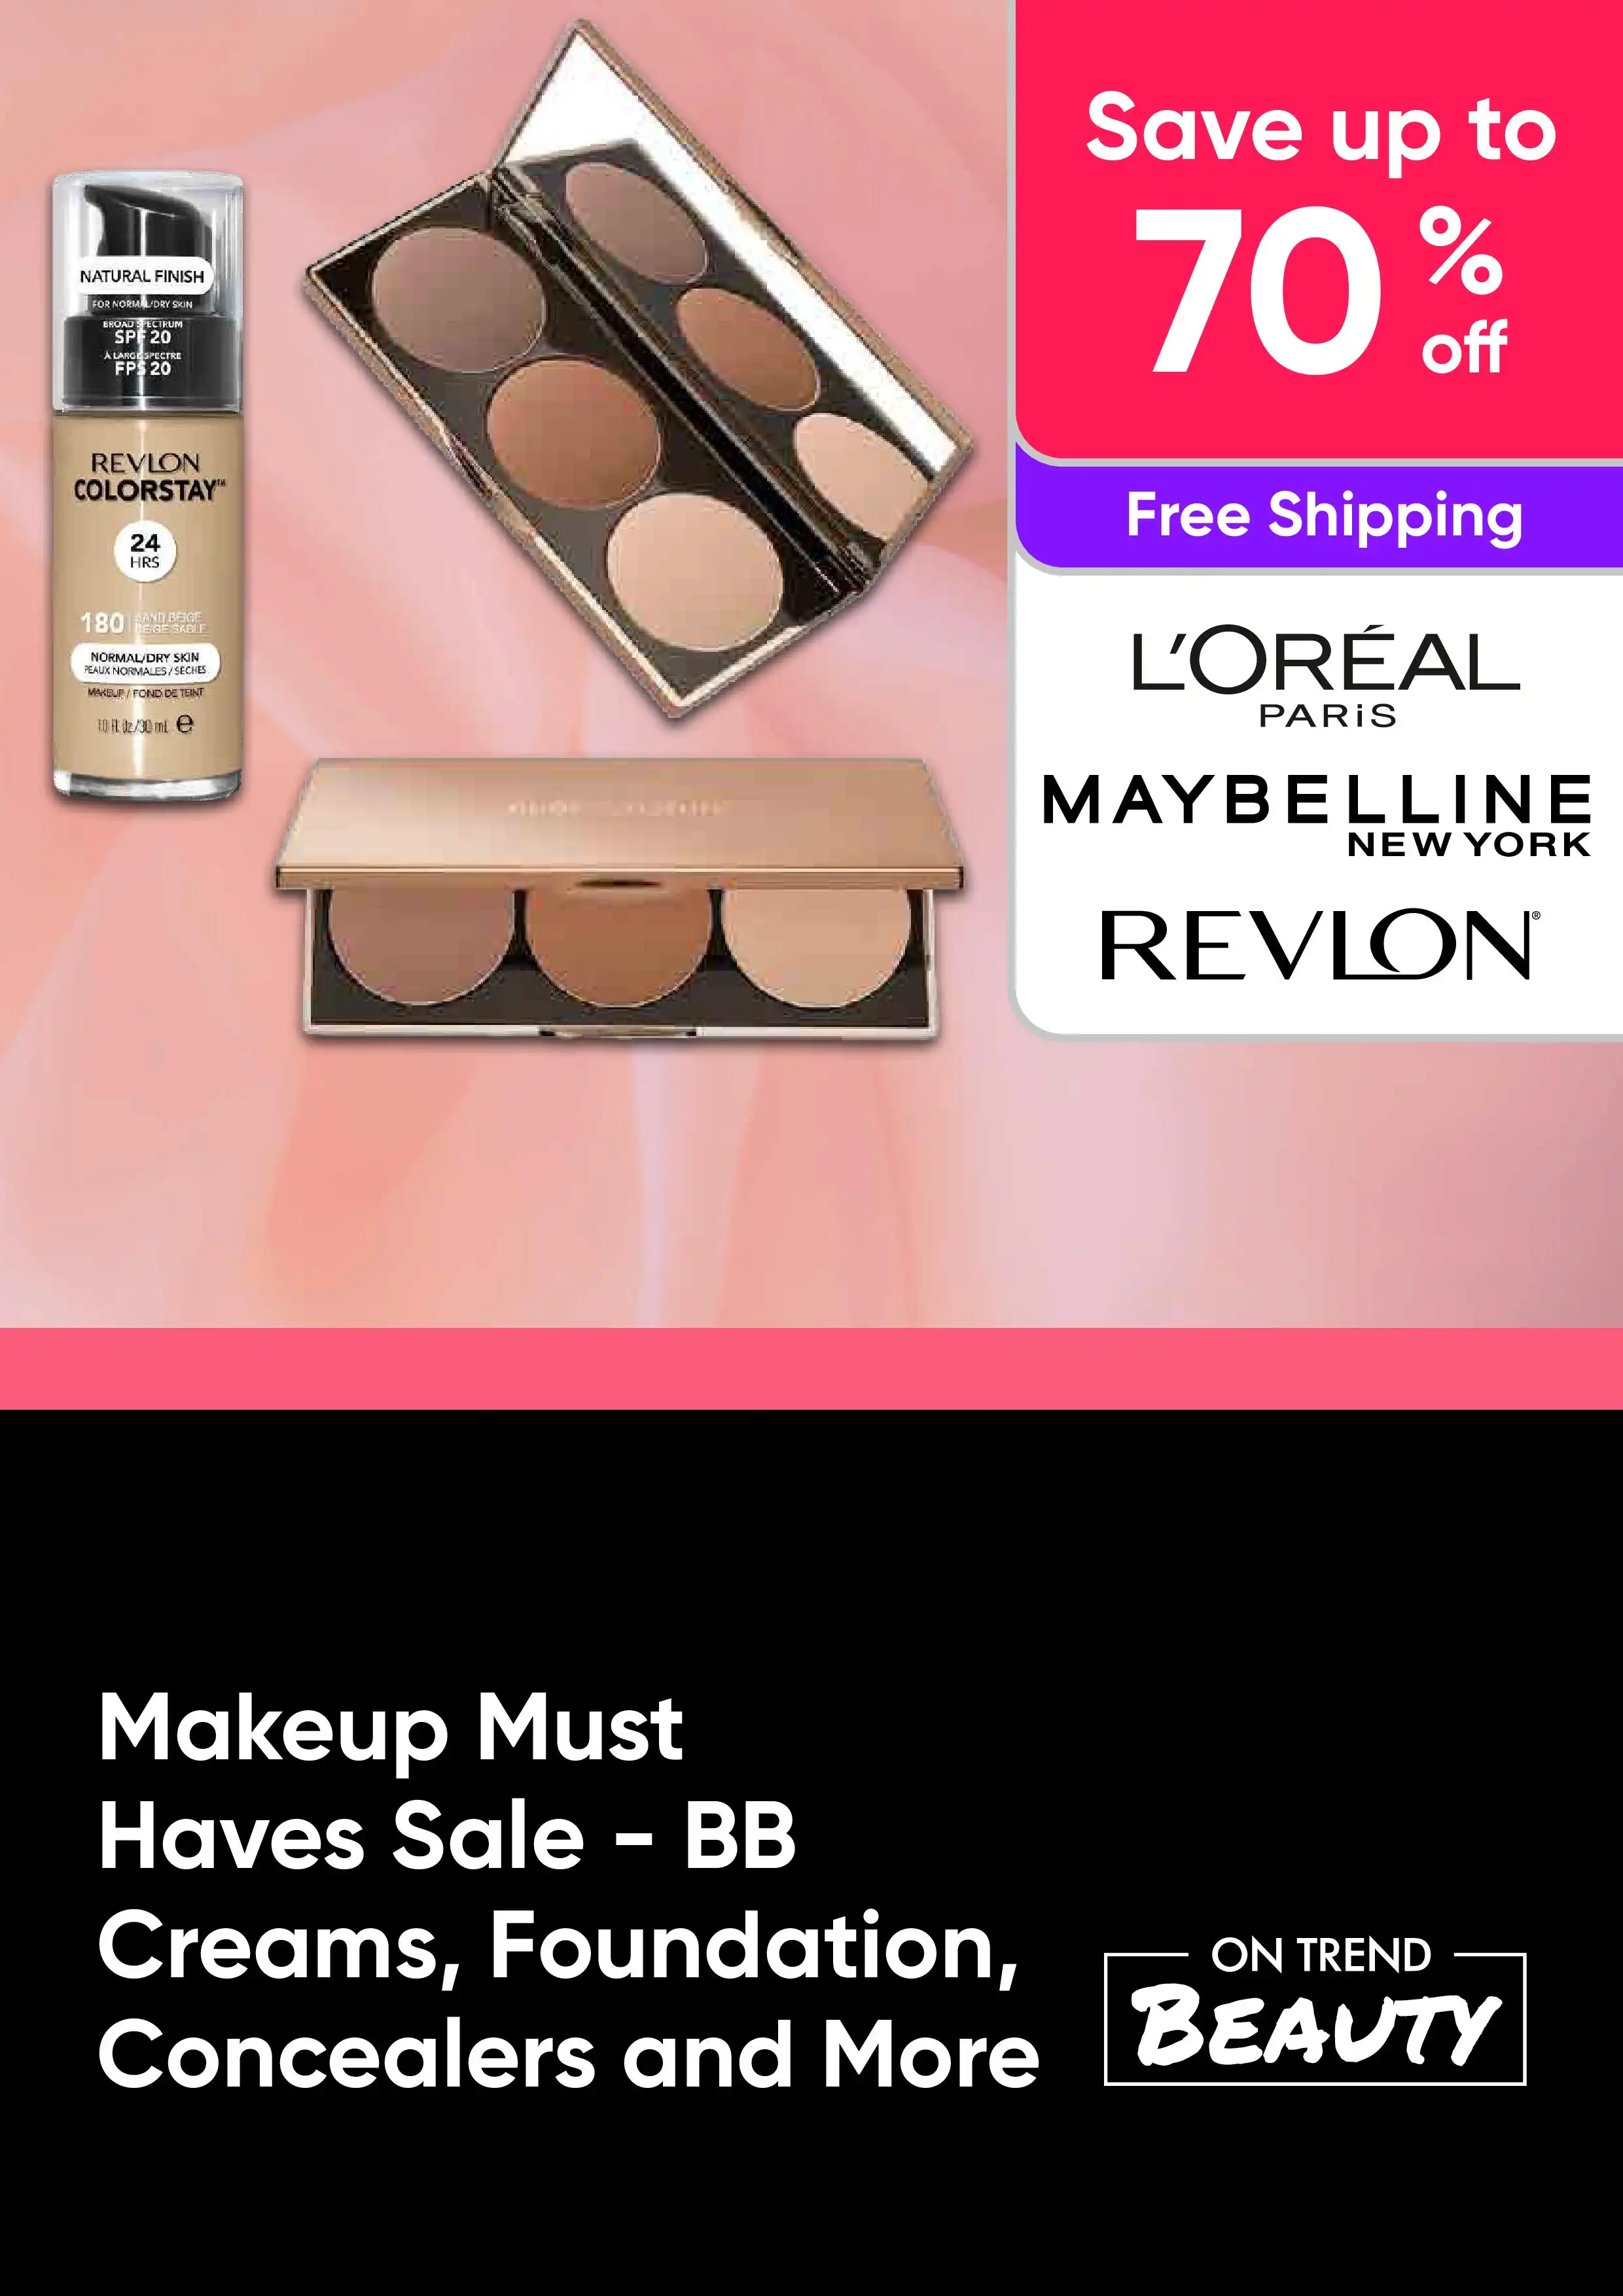 Makeup Must Haves Sale - BB Creams, Foundation, Concealers and More - Benefit, L'Oreal, Maybelline, Revlon - Up to 70% Off